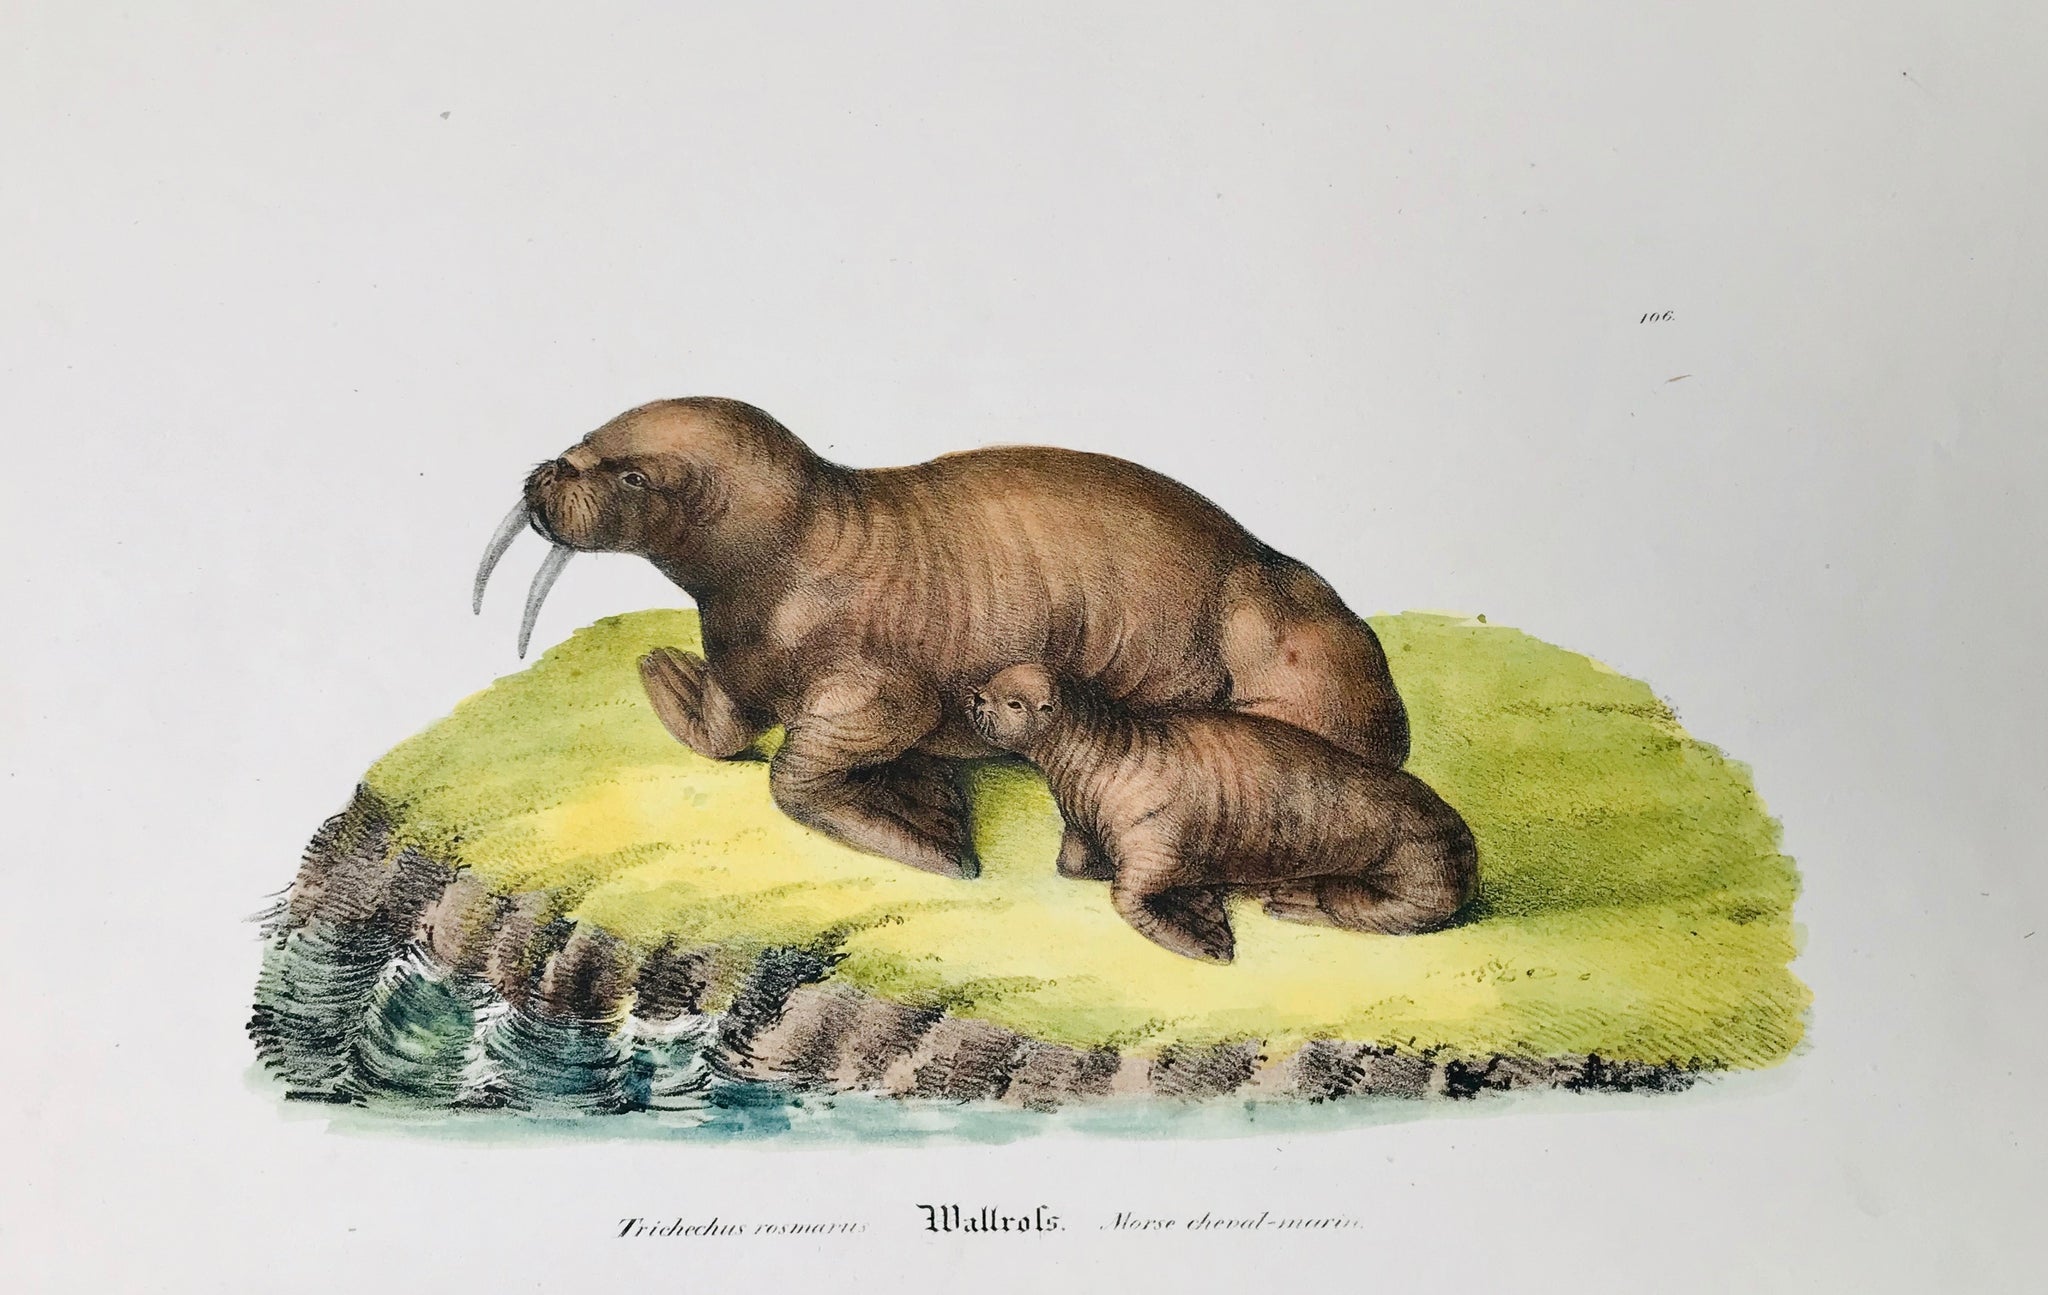 Walrus. Trichechus rosmarus Wallross Morse cheval-marin  Anonymous lithograph ca 1860. interior design, wall decoration, ideas, idea, gift ideas, present, vintage, charming, special, decoration, home interior, living room design